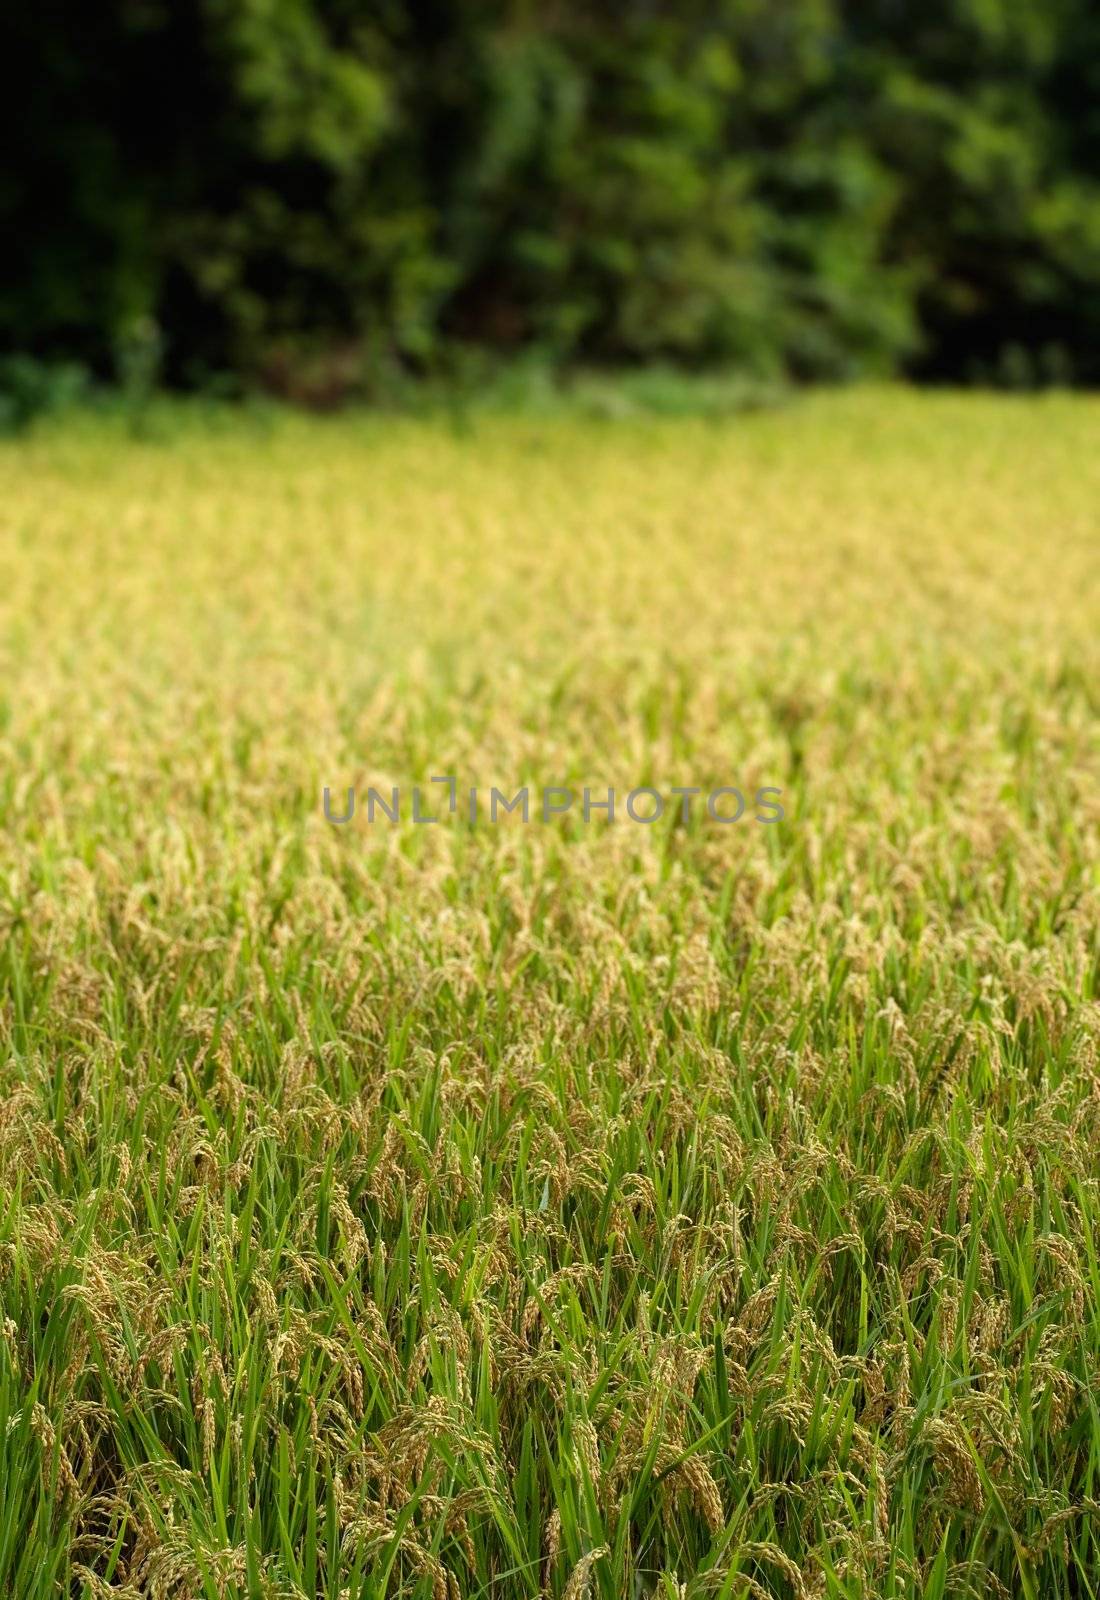 Here are ripe rice with beautiful yellow color.